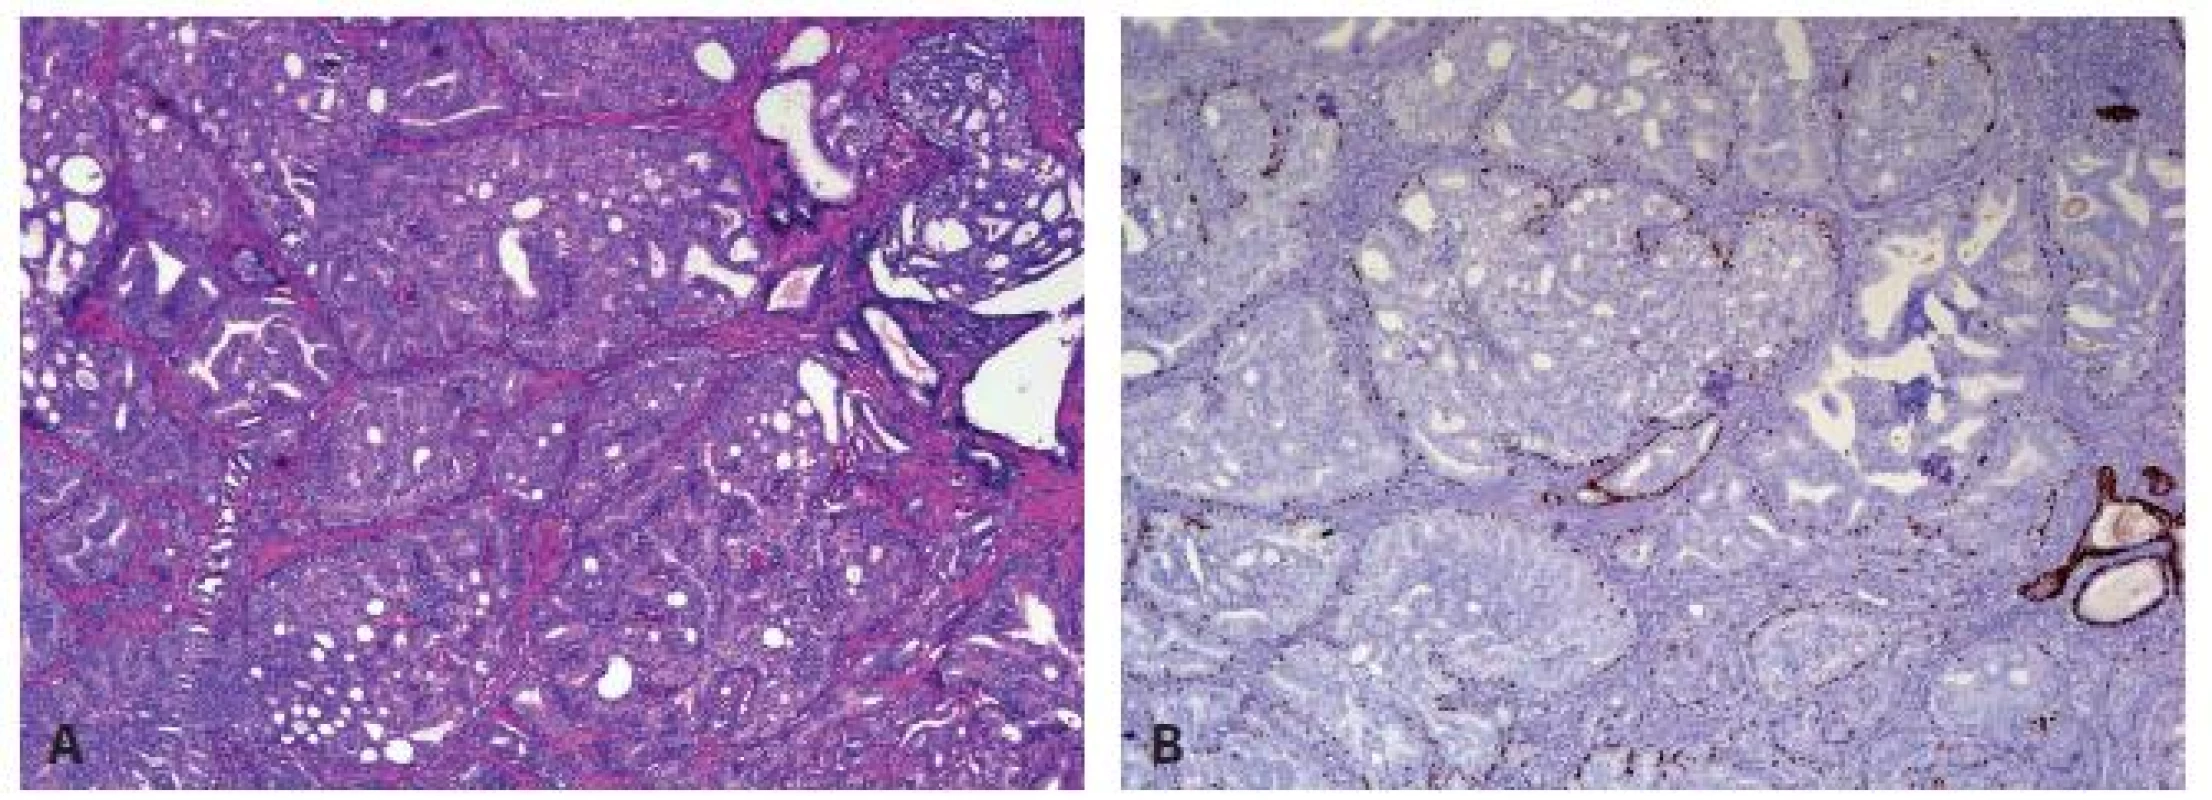 Intraductal carcinoma of the prostate presents as marked expansile growth of prostate cancer cells (A) within preexisting prostate ducts and acini (A) with at least focally preserved basal cells on P63 immunostain (B).